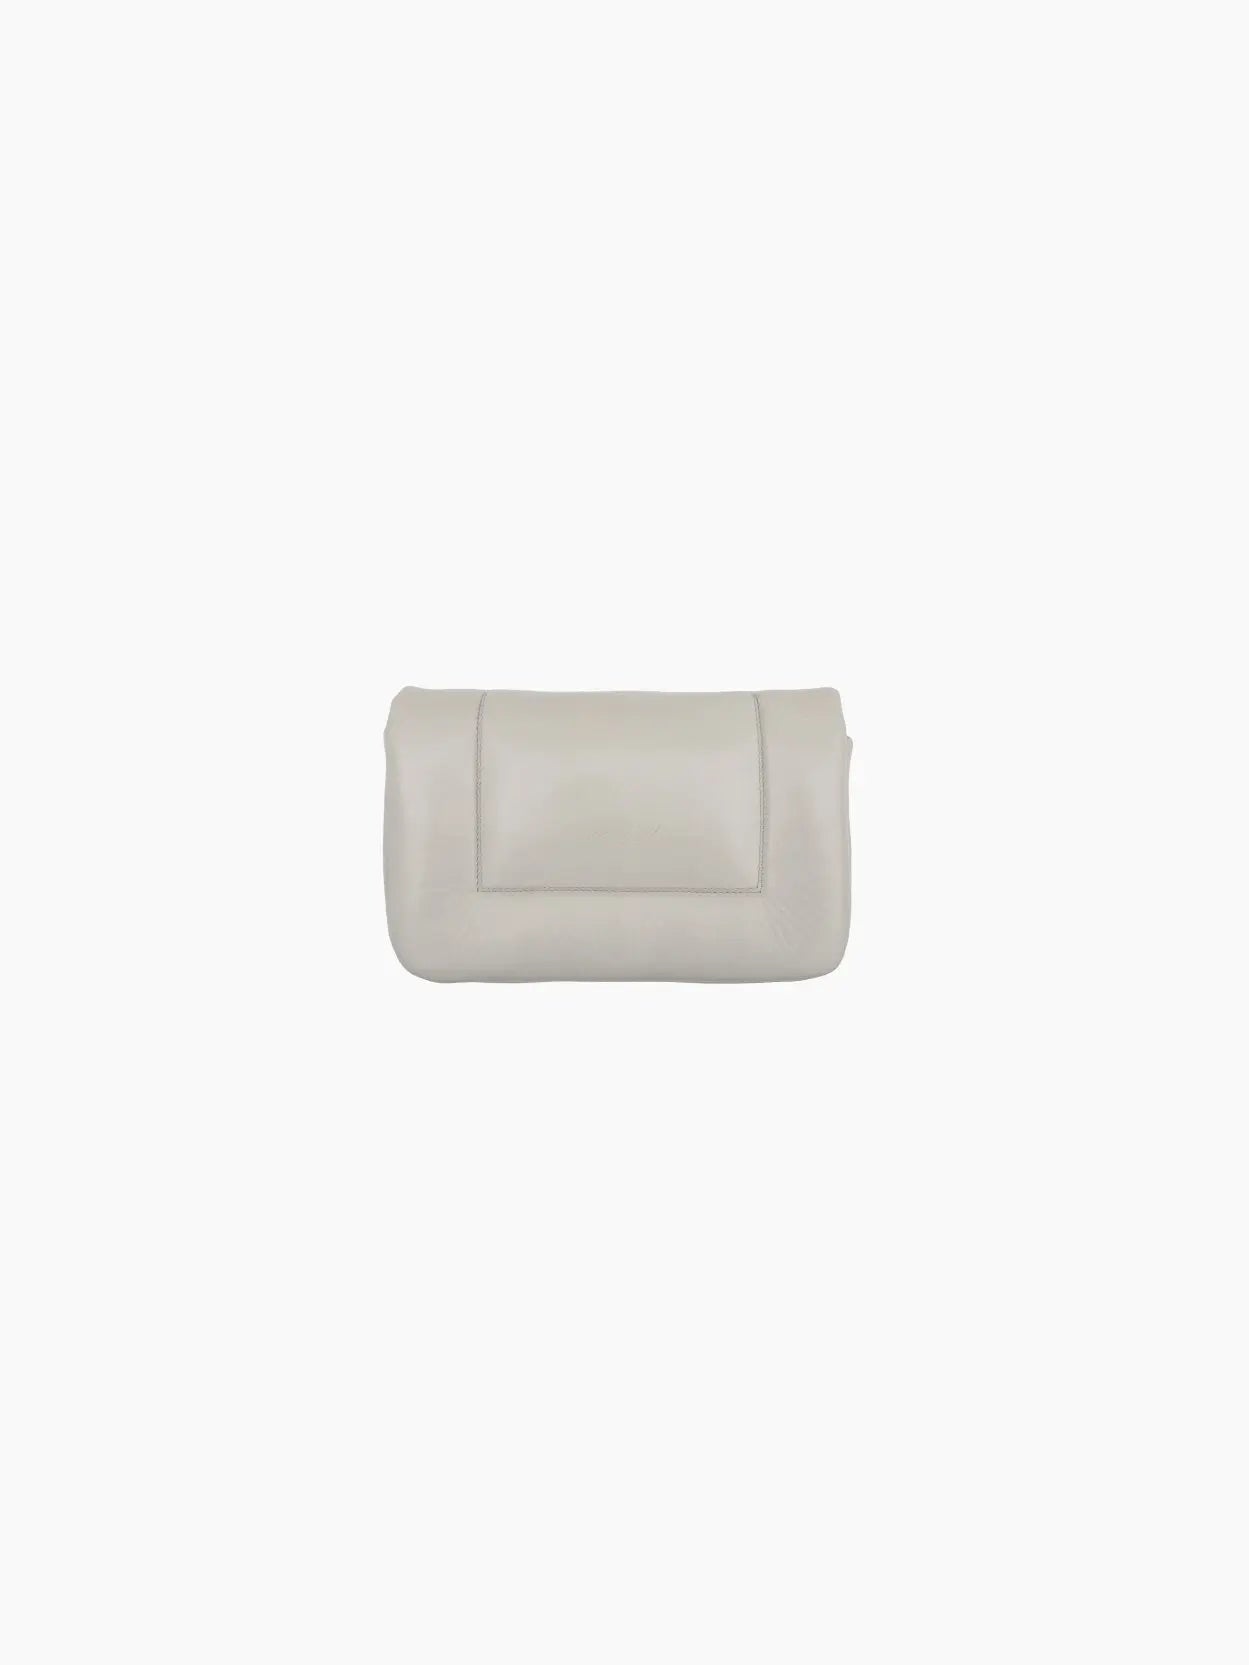 A small, rectangular, off-white Riquadro Clutch Mist from Marsèll is displayed against a plain white background. The handbag has a simple design with a flap closure and minimal detailing, reflecting the timeless elegance found in many Barcelona boutiques.